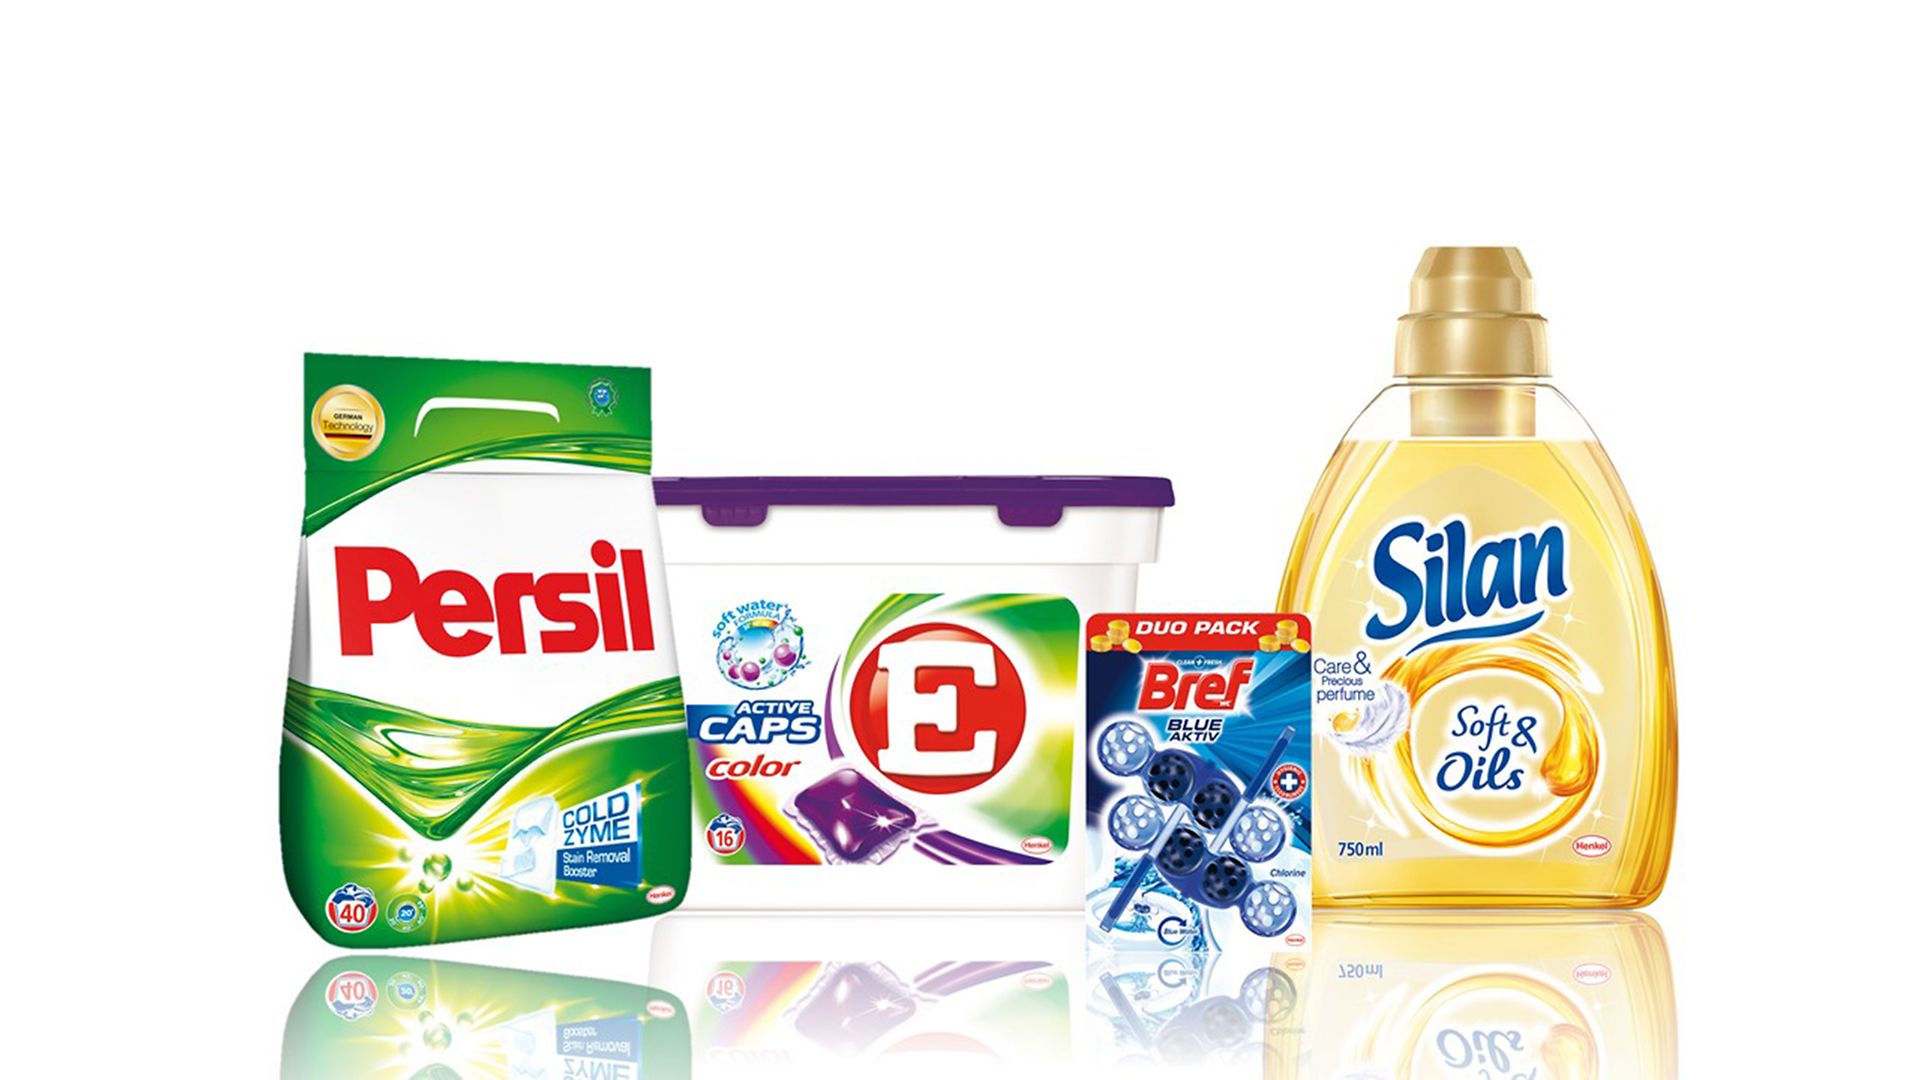 The portfolio in Poland includes globally leading Laundry & Home Care brands.